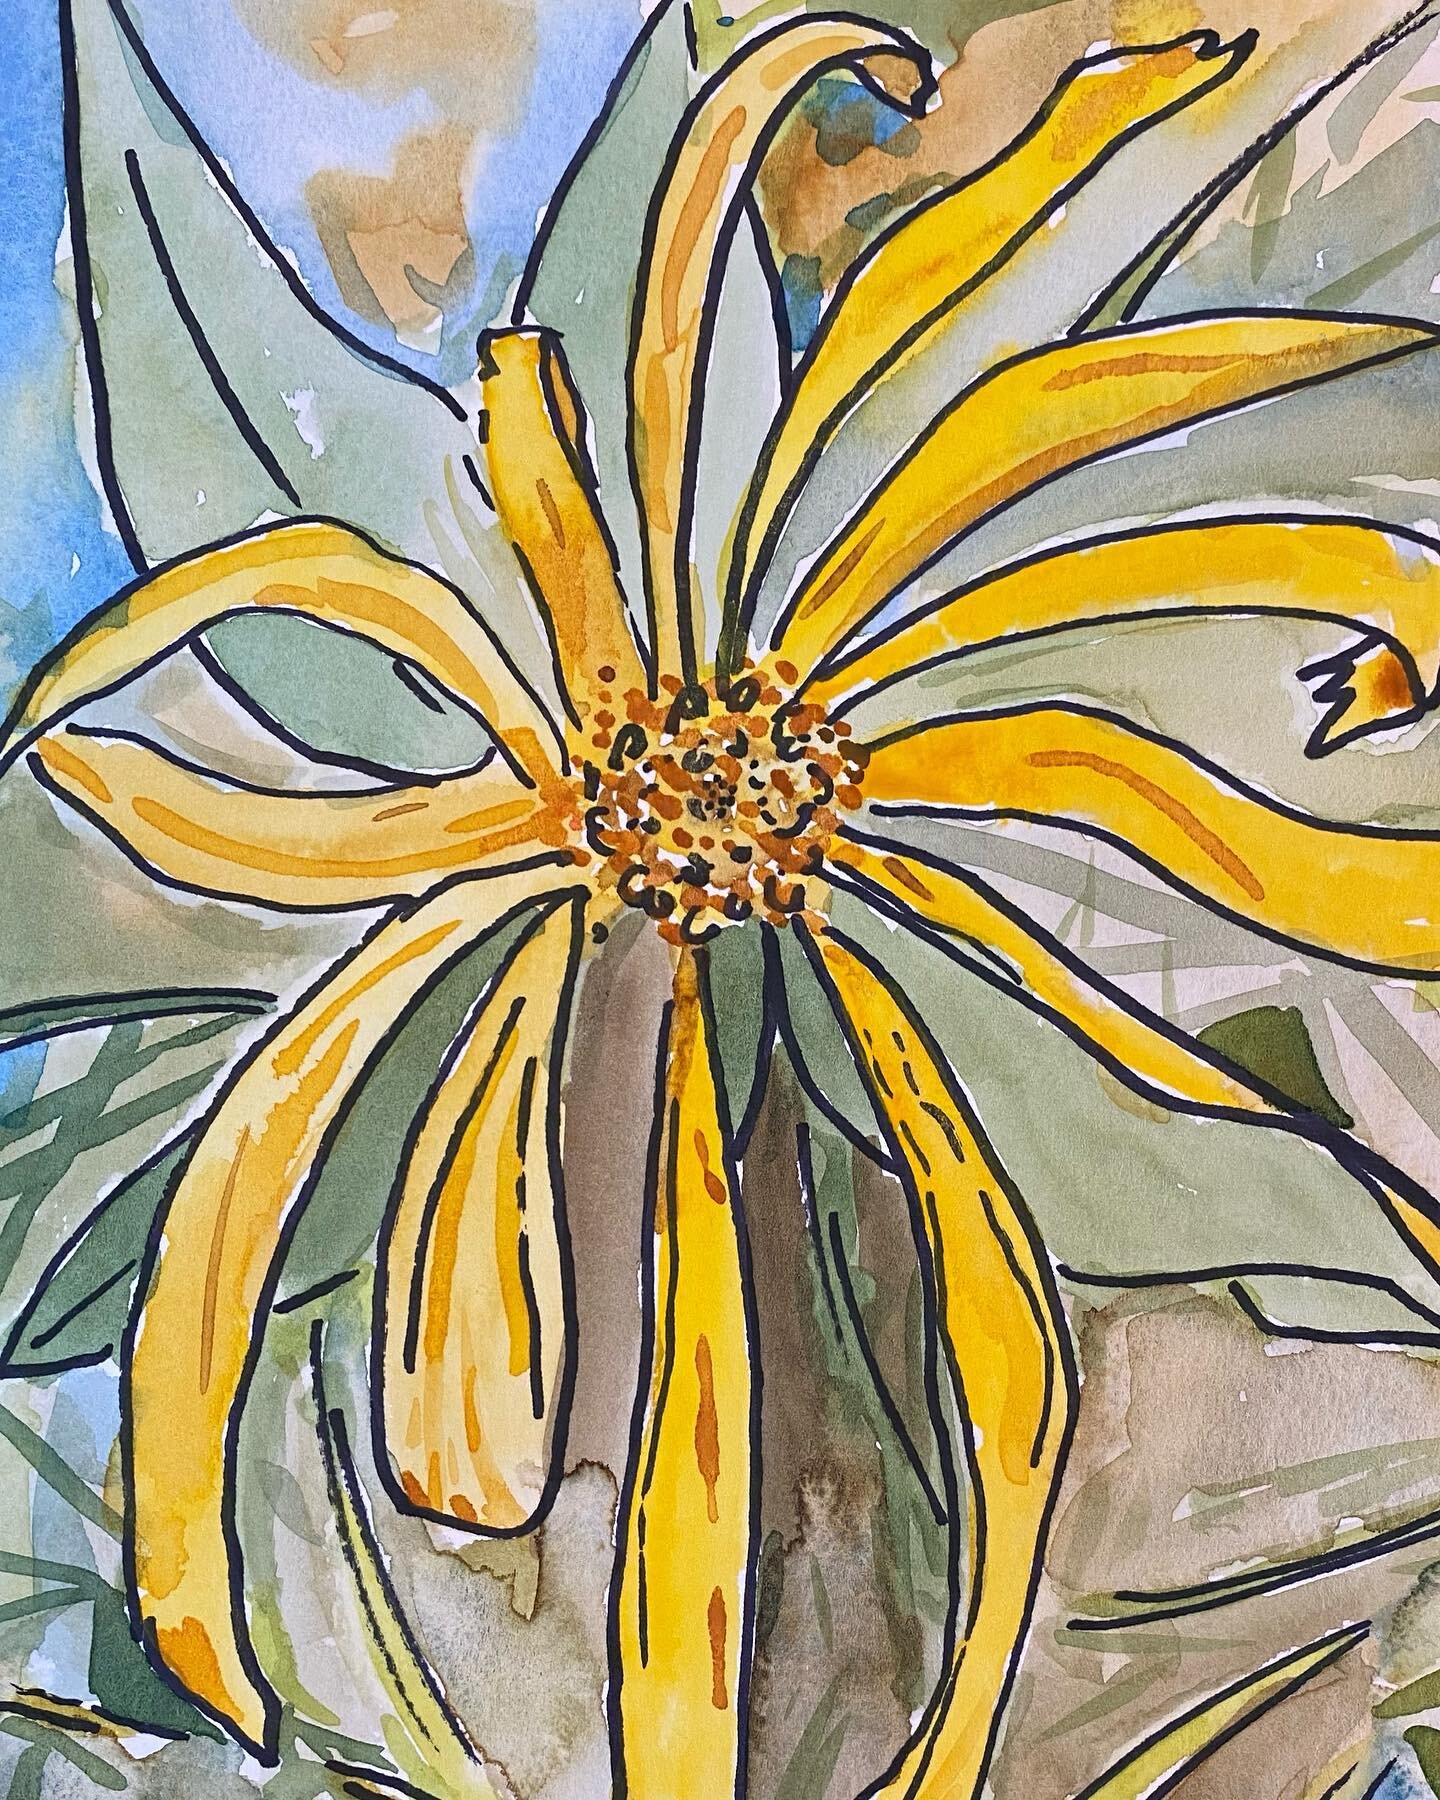 Another watercolor demo for my @richmondartcenter students. We were doing paintings inspired by Georgia O'Keefe's flower closeups. Sharpies + watercolors are a great combo! Good for adding some definition while still getting the great organic color m